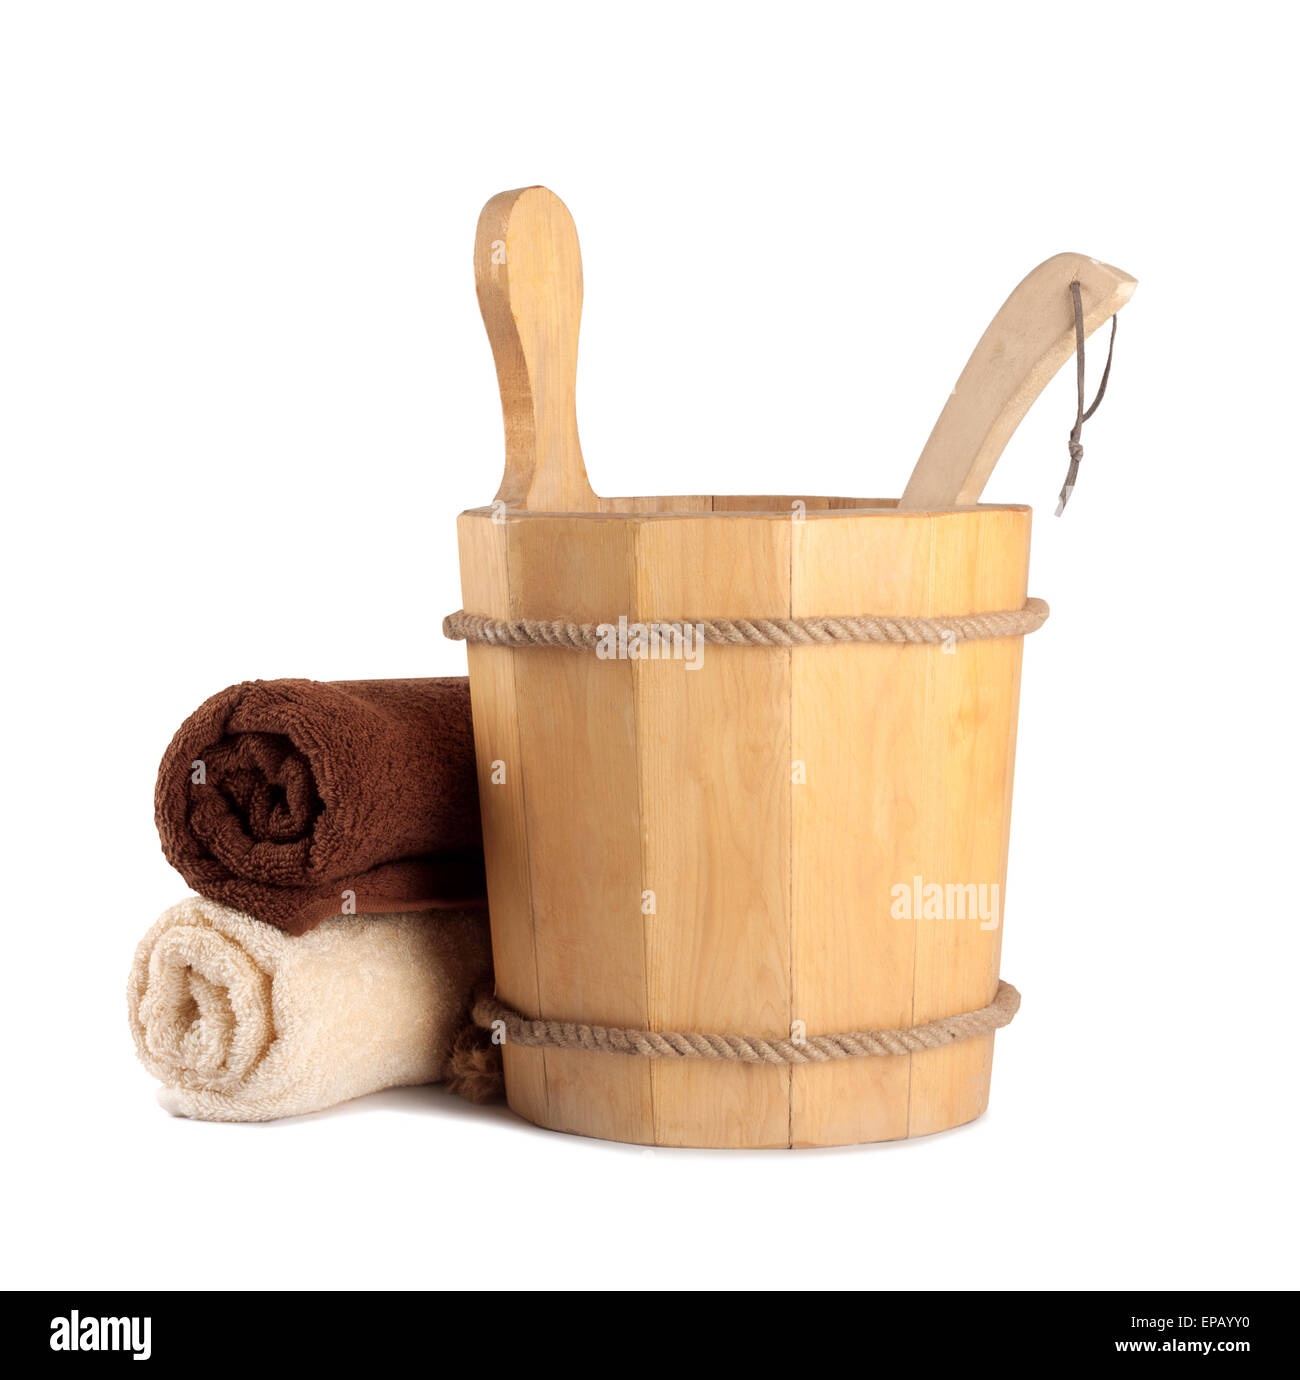 Wooden bucket with ladle for the sauna and stack of clean towels Stock Photo